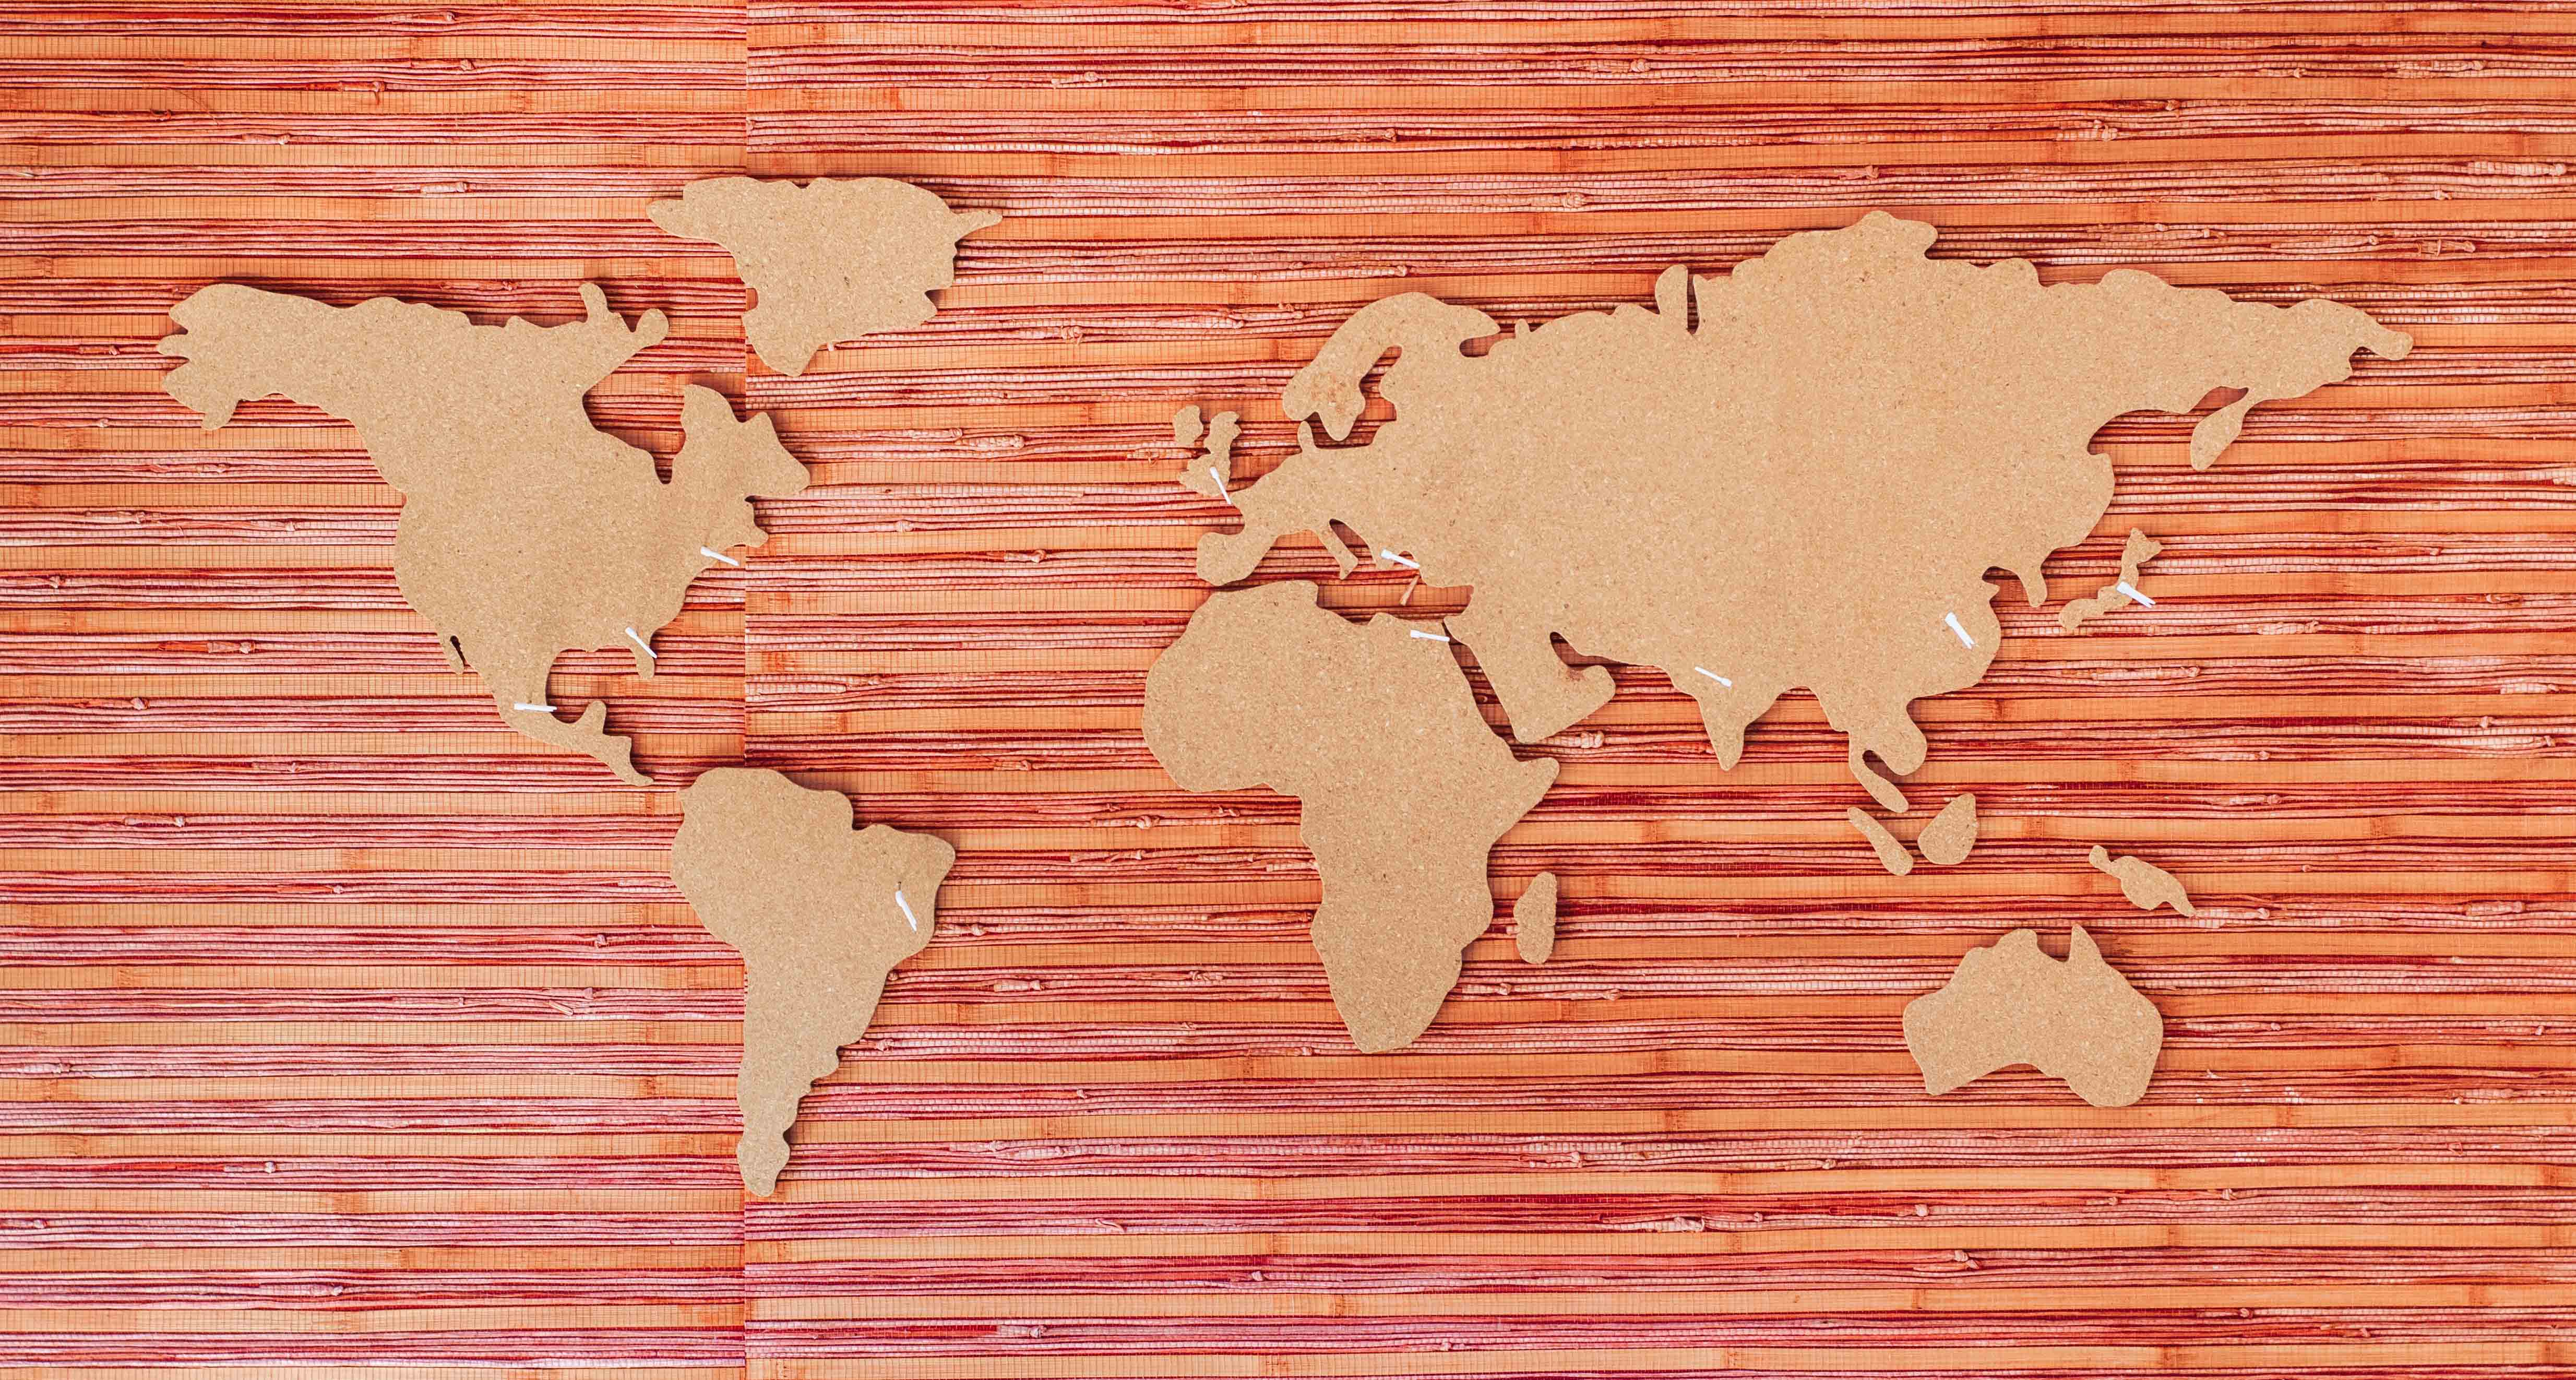 global marketing and a map of the world